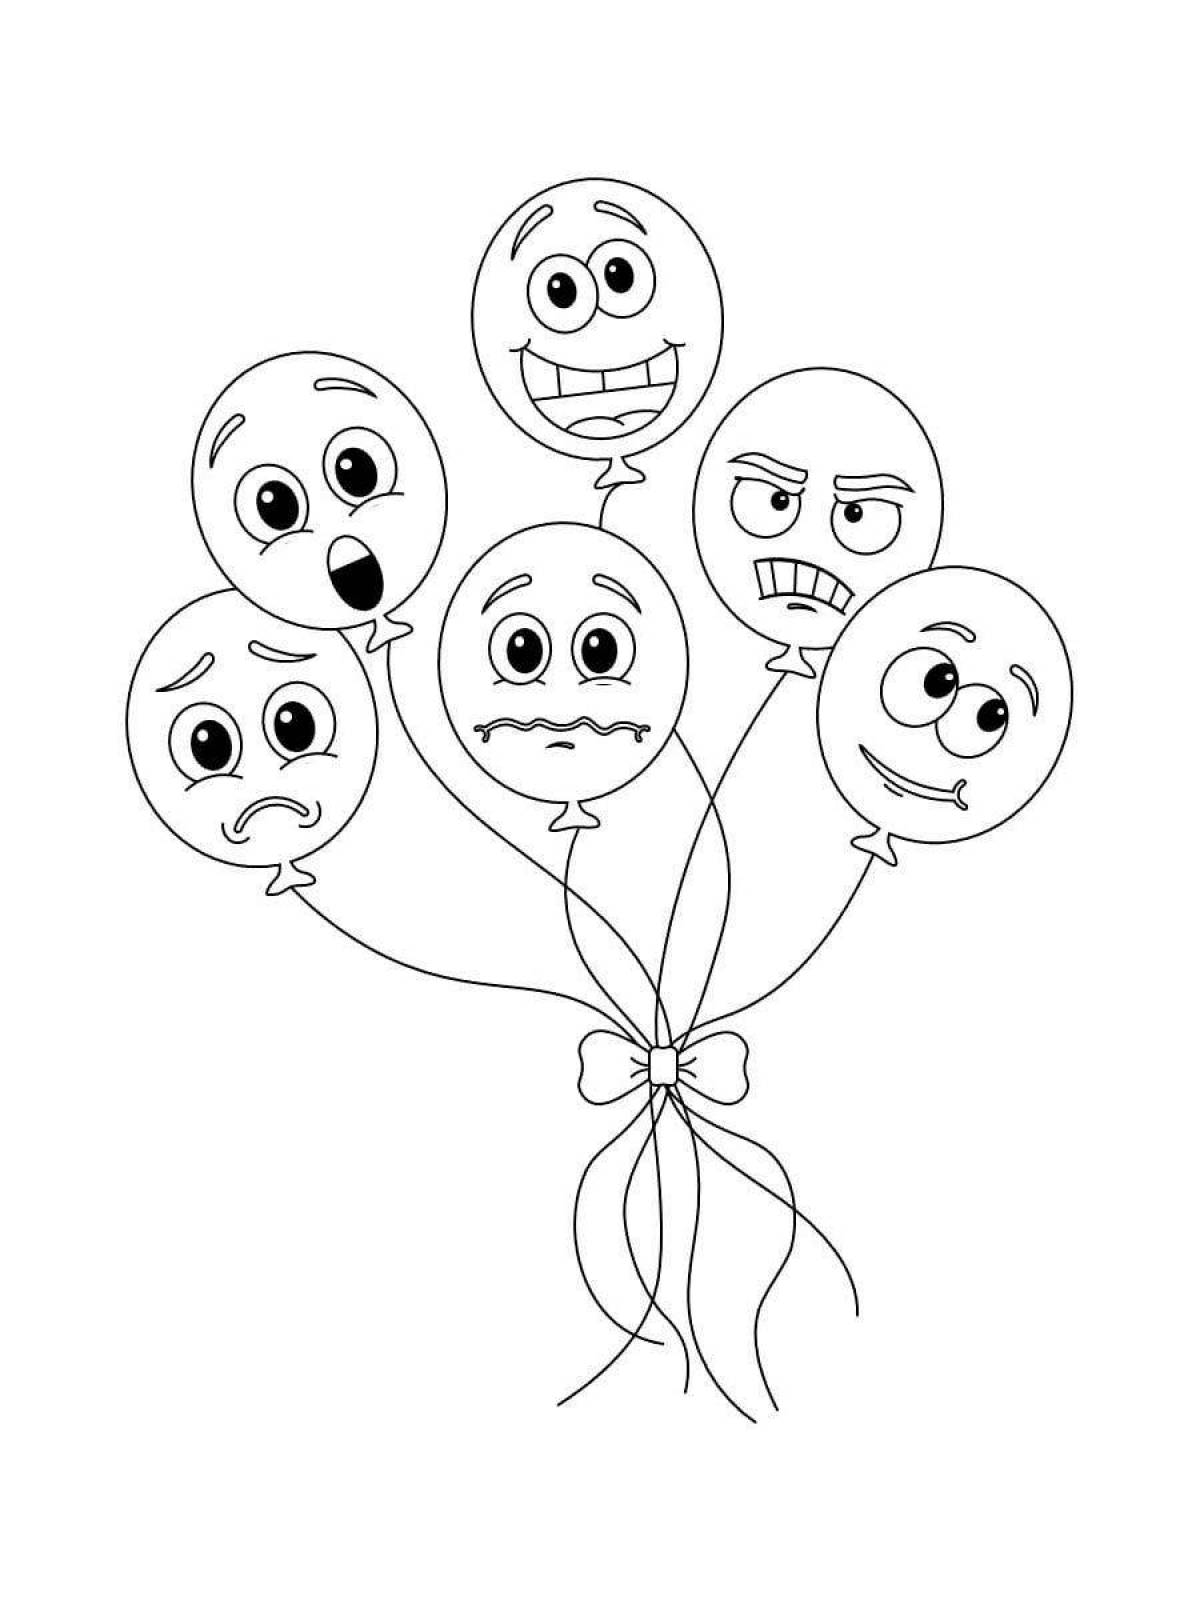 Exciting emotion coloring pages for kids